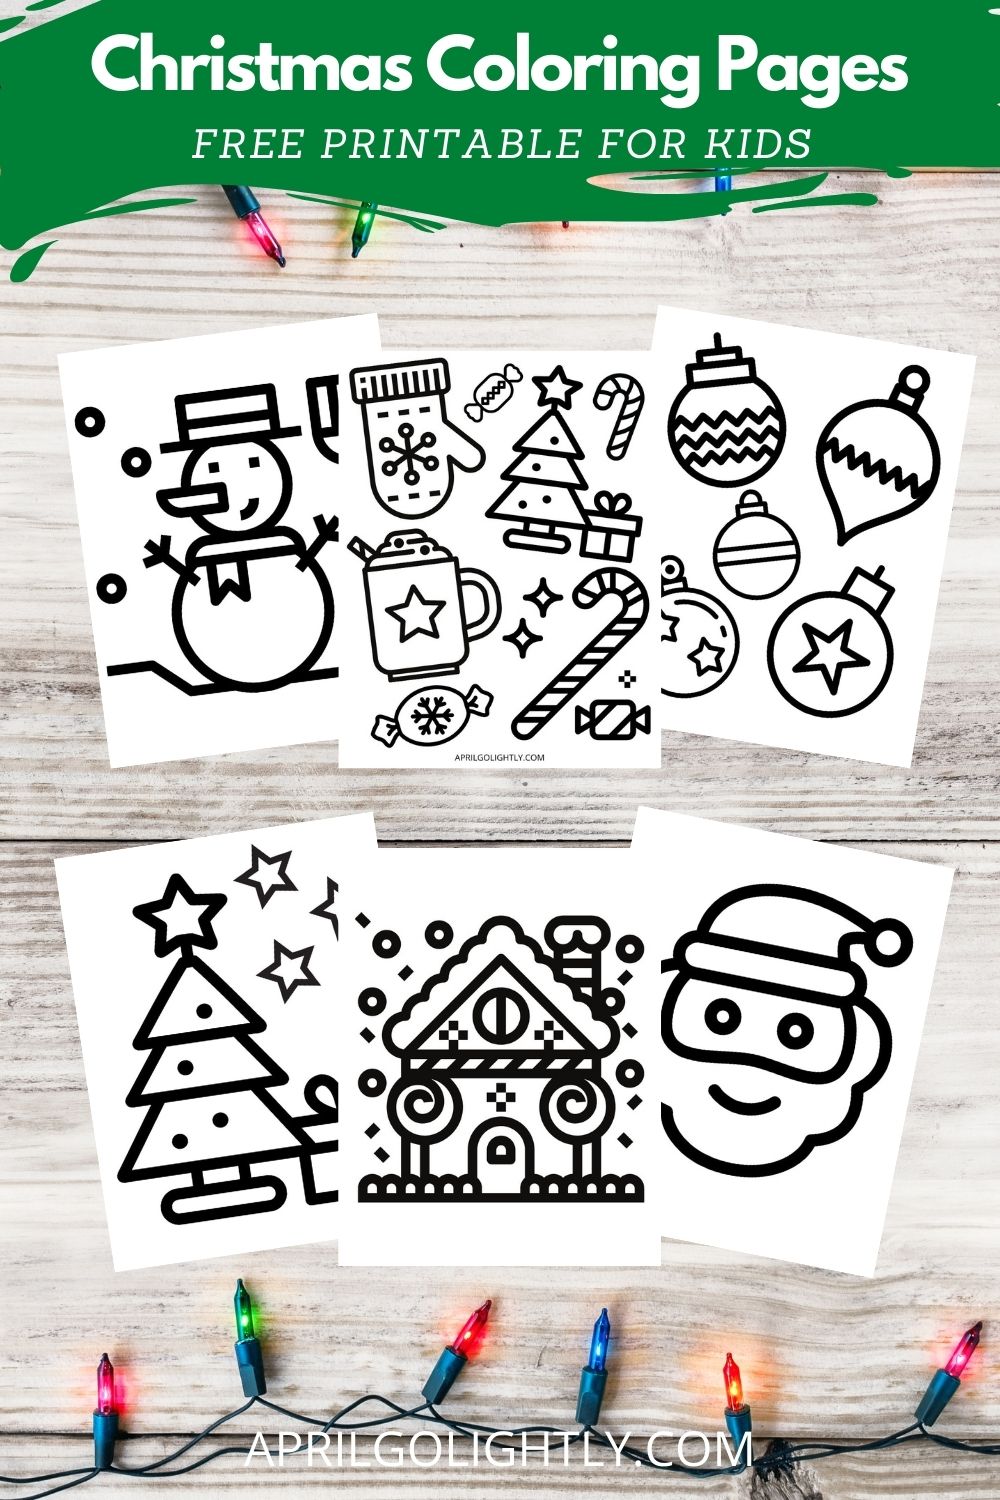 20+ Christmas Coloring Pages Free Printables